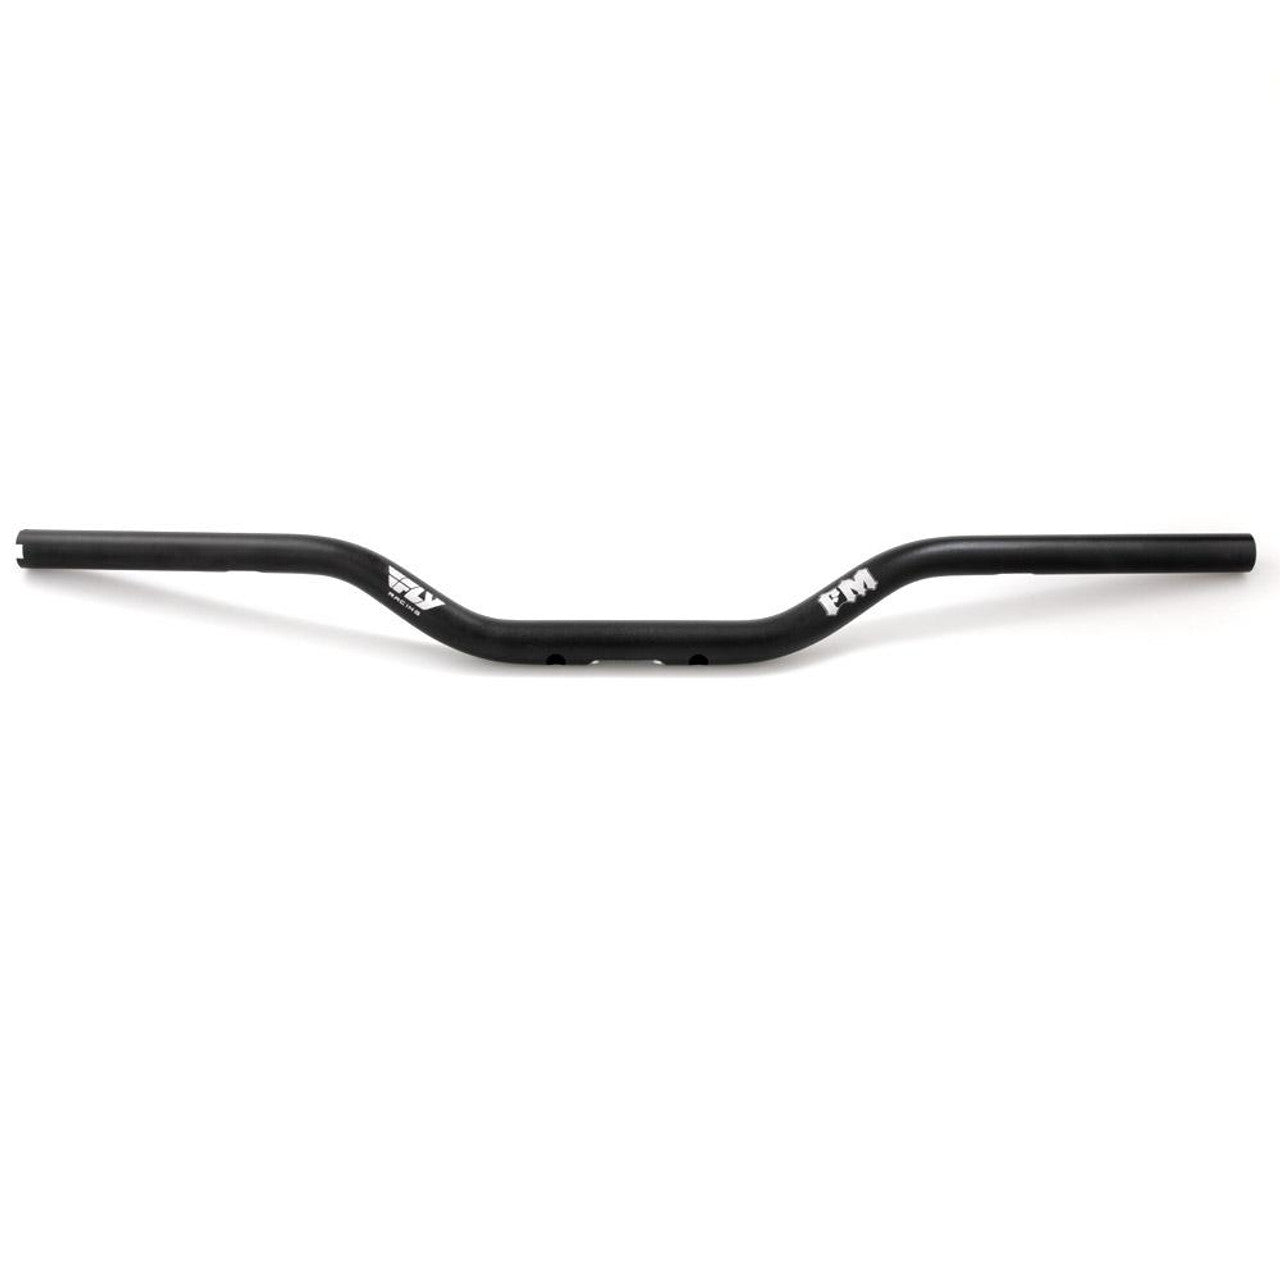 FM FLY MOTO STYLE BARS FOR STOCK HARLEY HAND CONTROLS